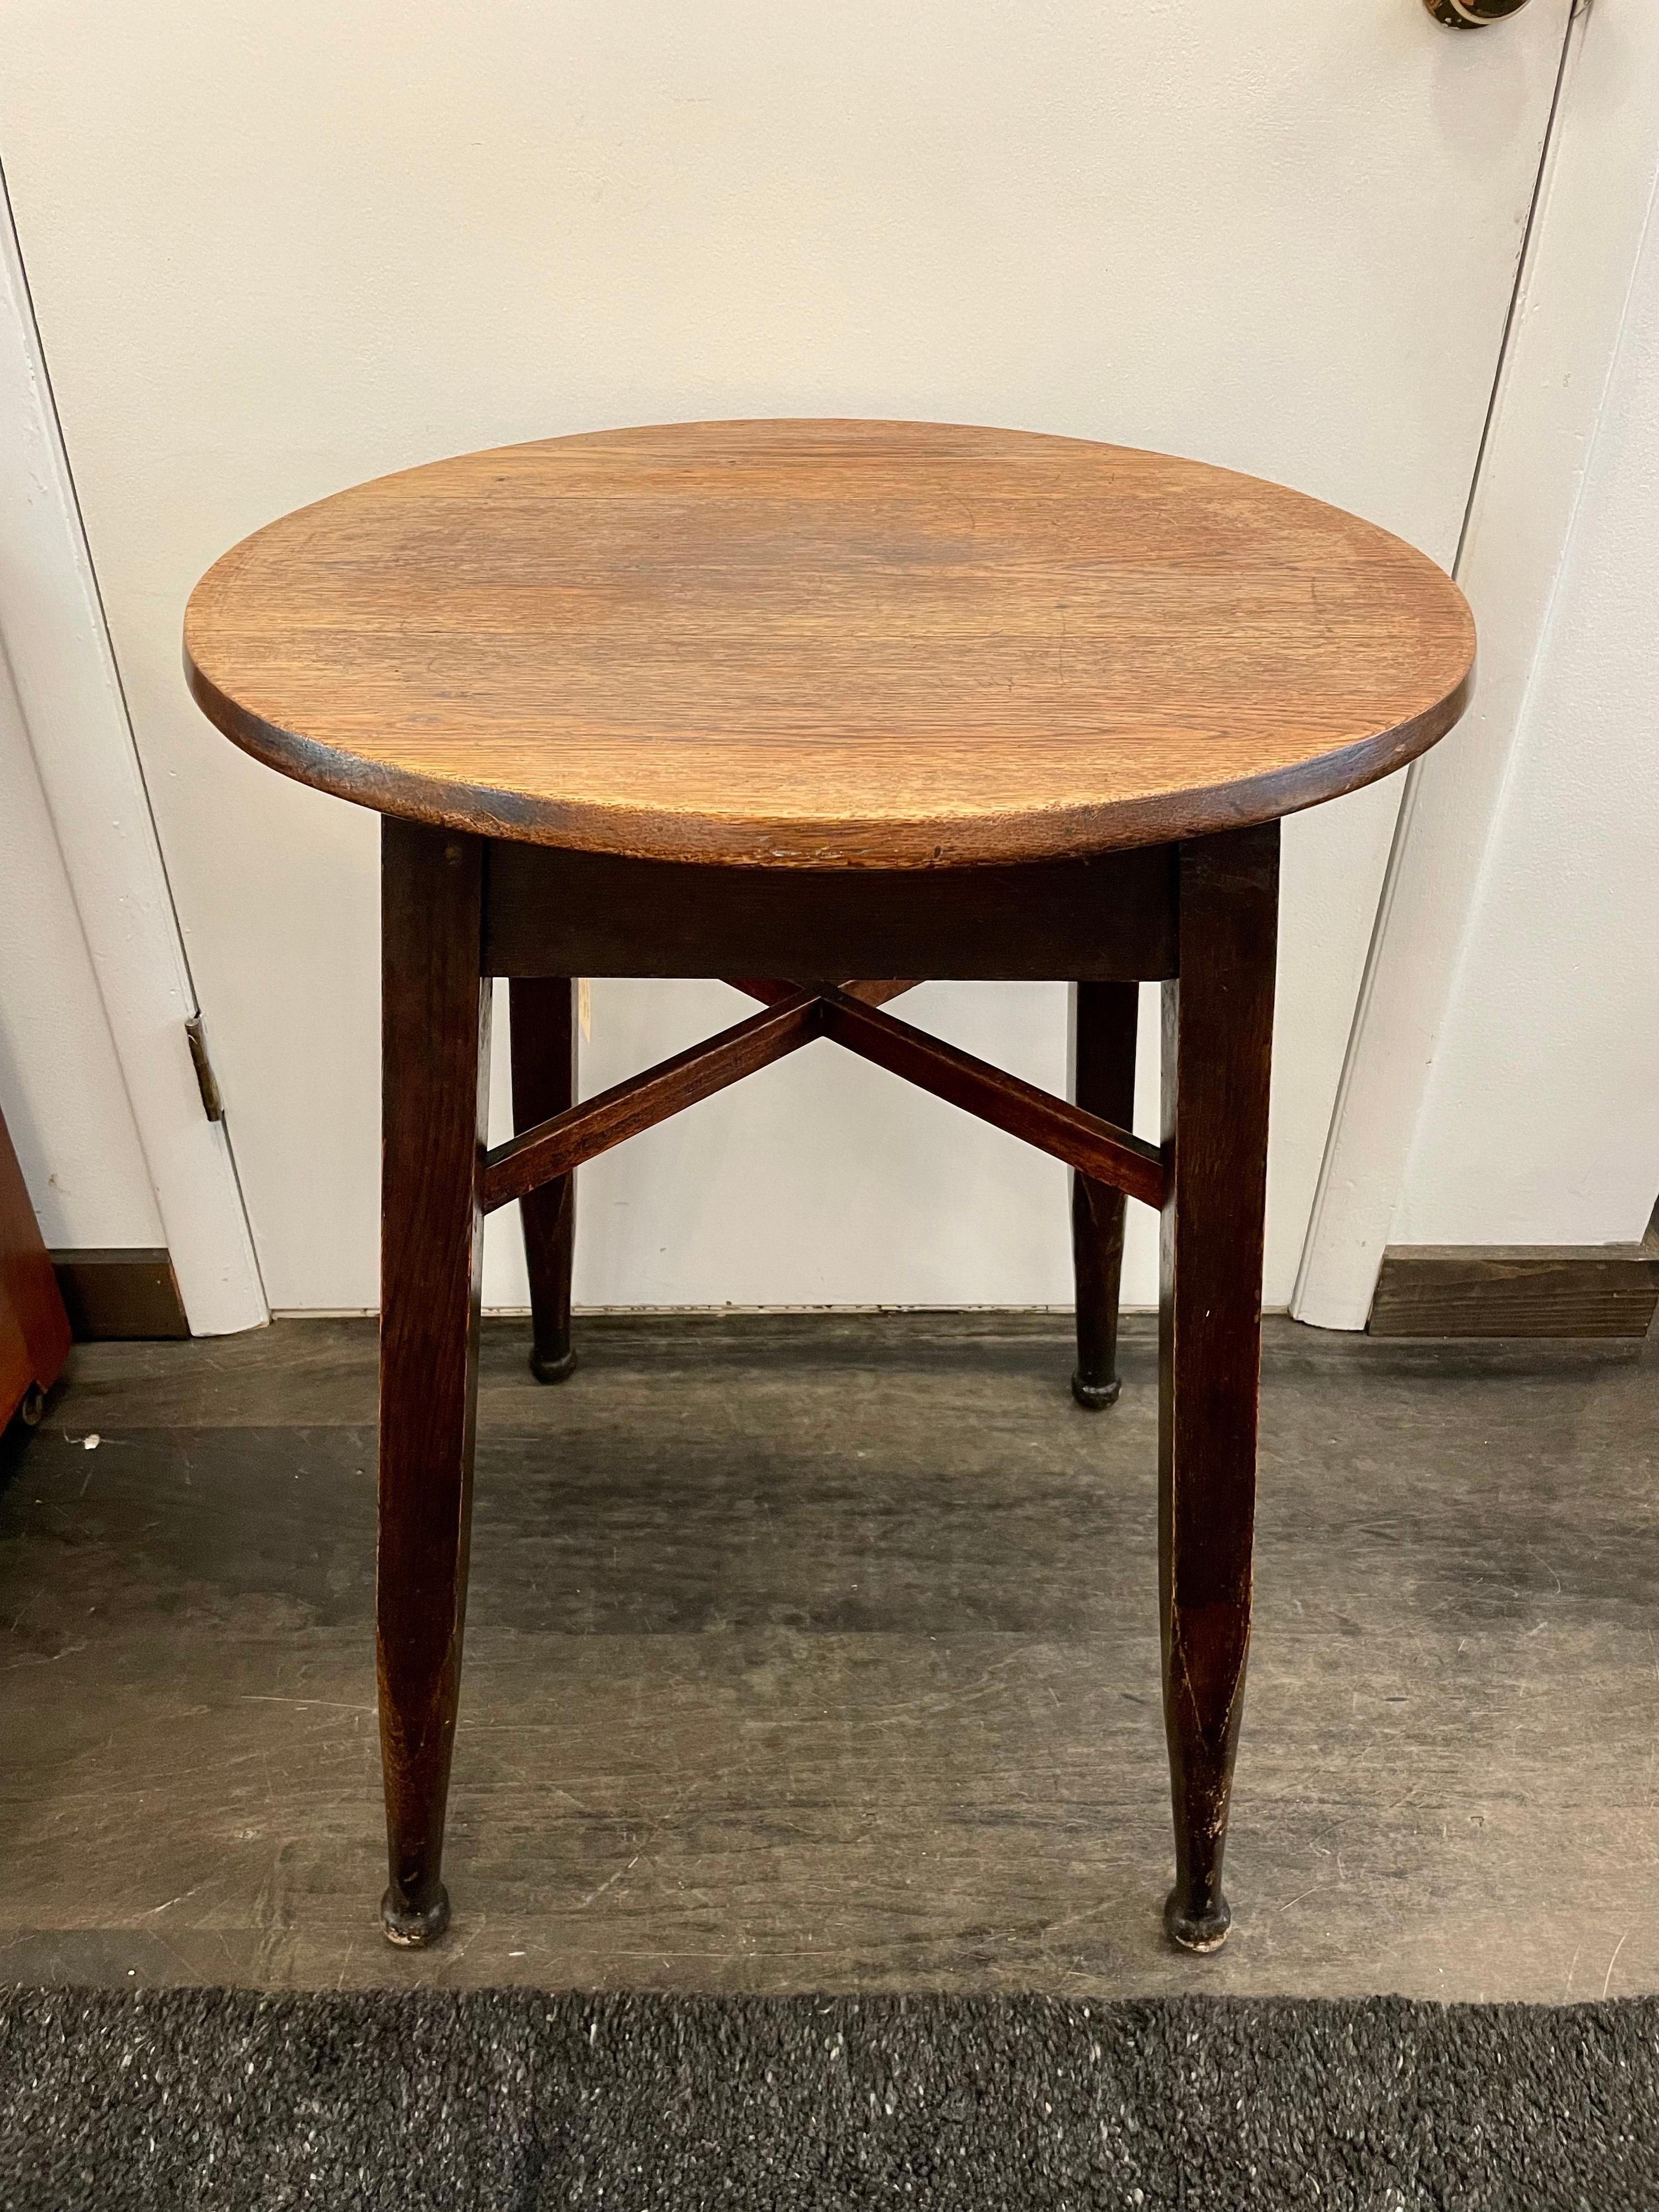 This wonderful occasional table in French oak with four tapering legs and stretchers for stability is worn beautifully from years of loving use and enjoyment.  This is stable and ready to be enjoyed for another 100+ years.